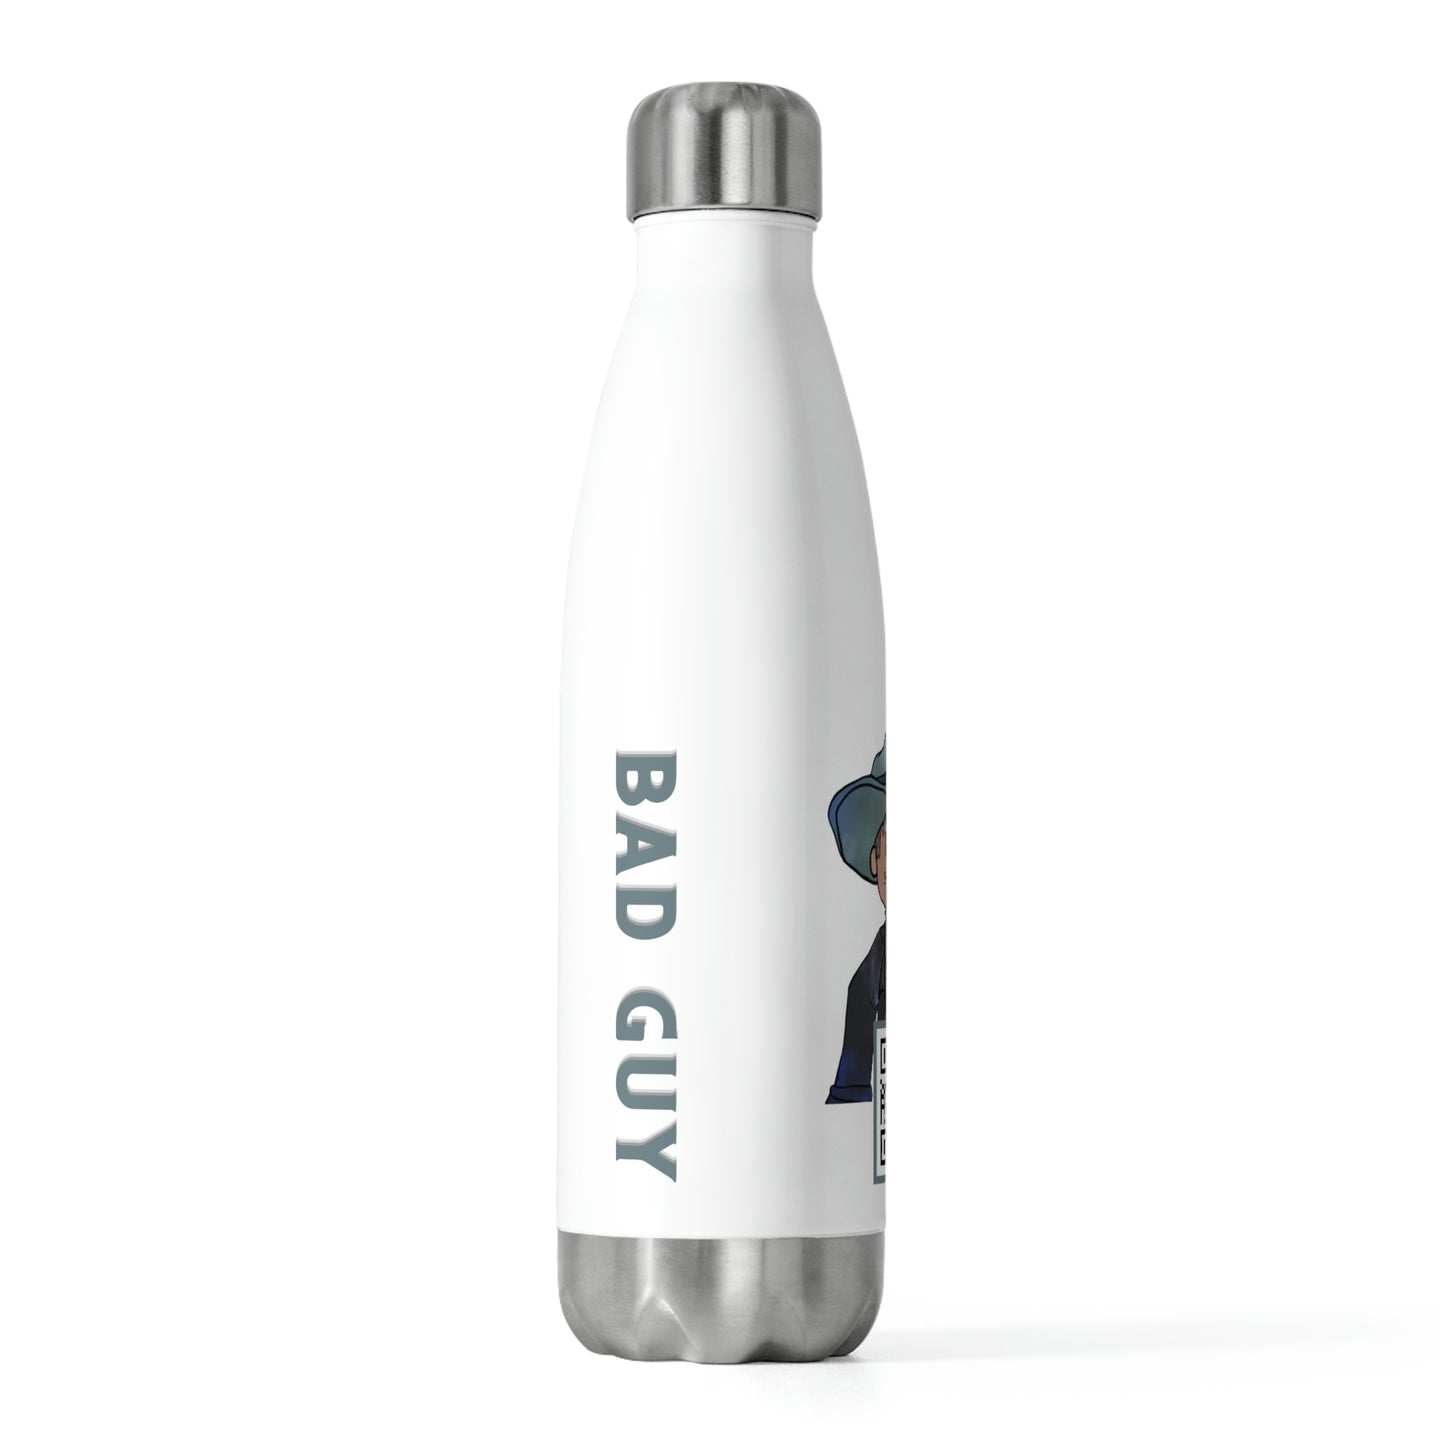 Bad Guy 20oz Stainless Steel Insulated Bottle